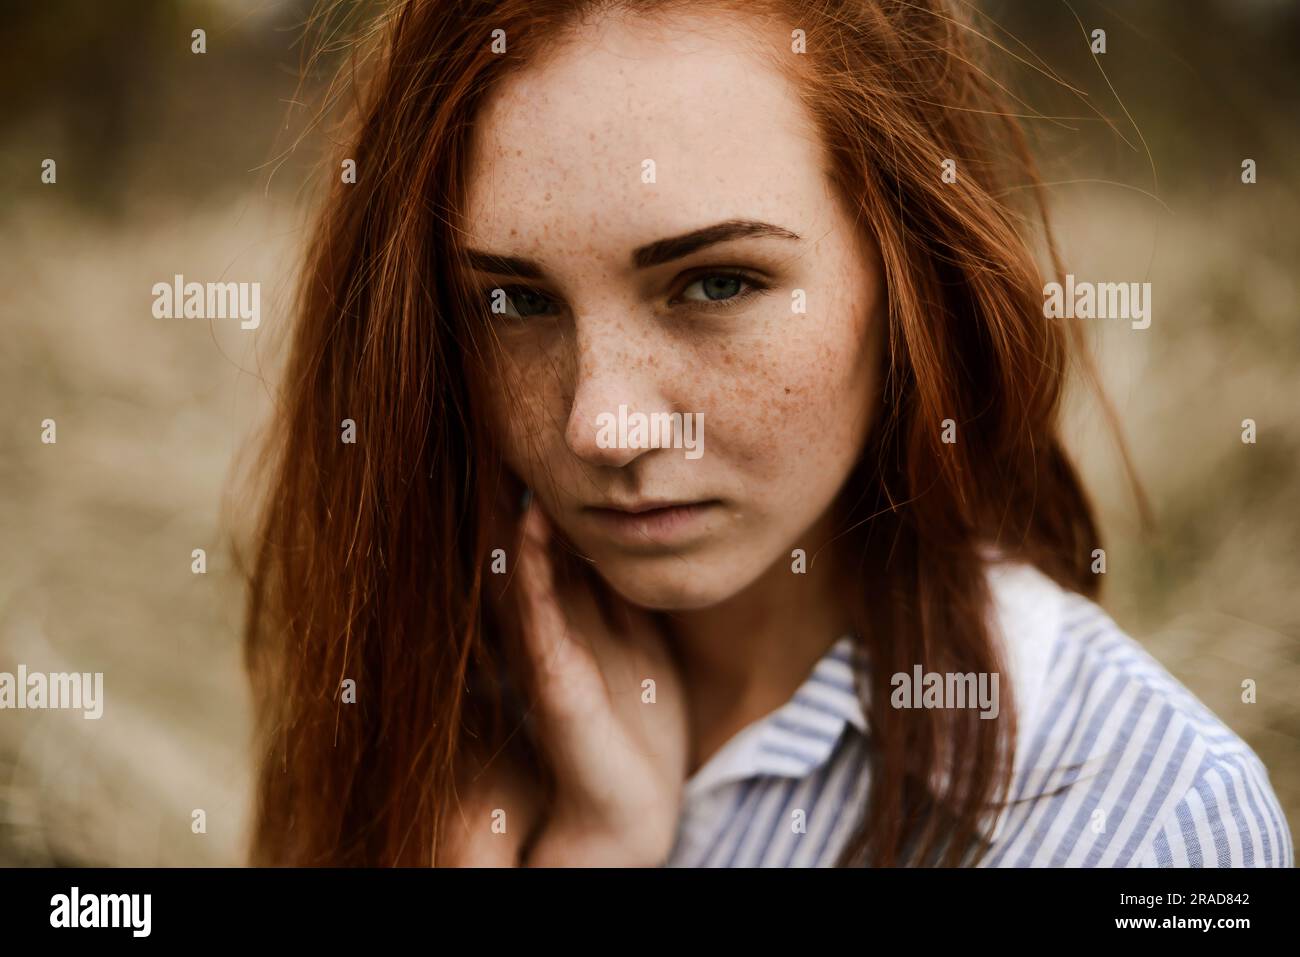 Close-up portrait of teenage girl with red head Banque D'Images